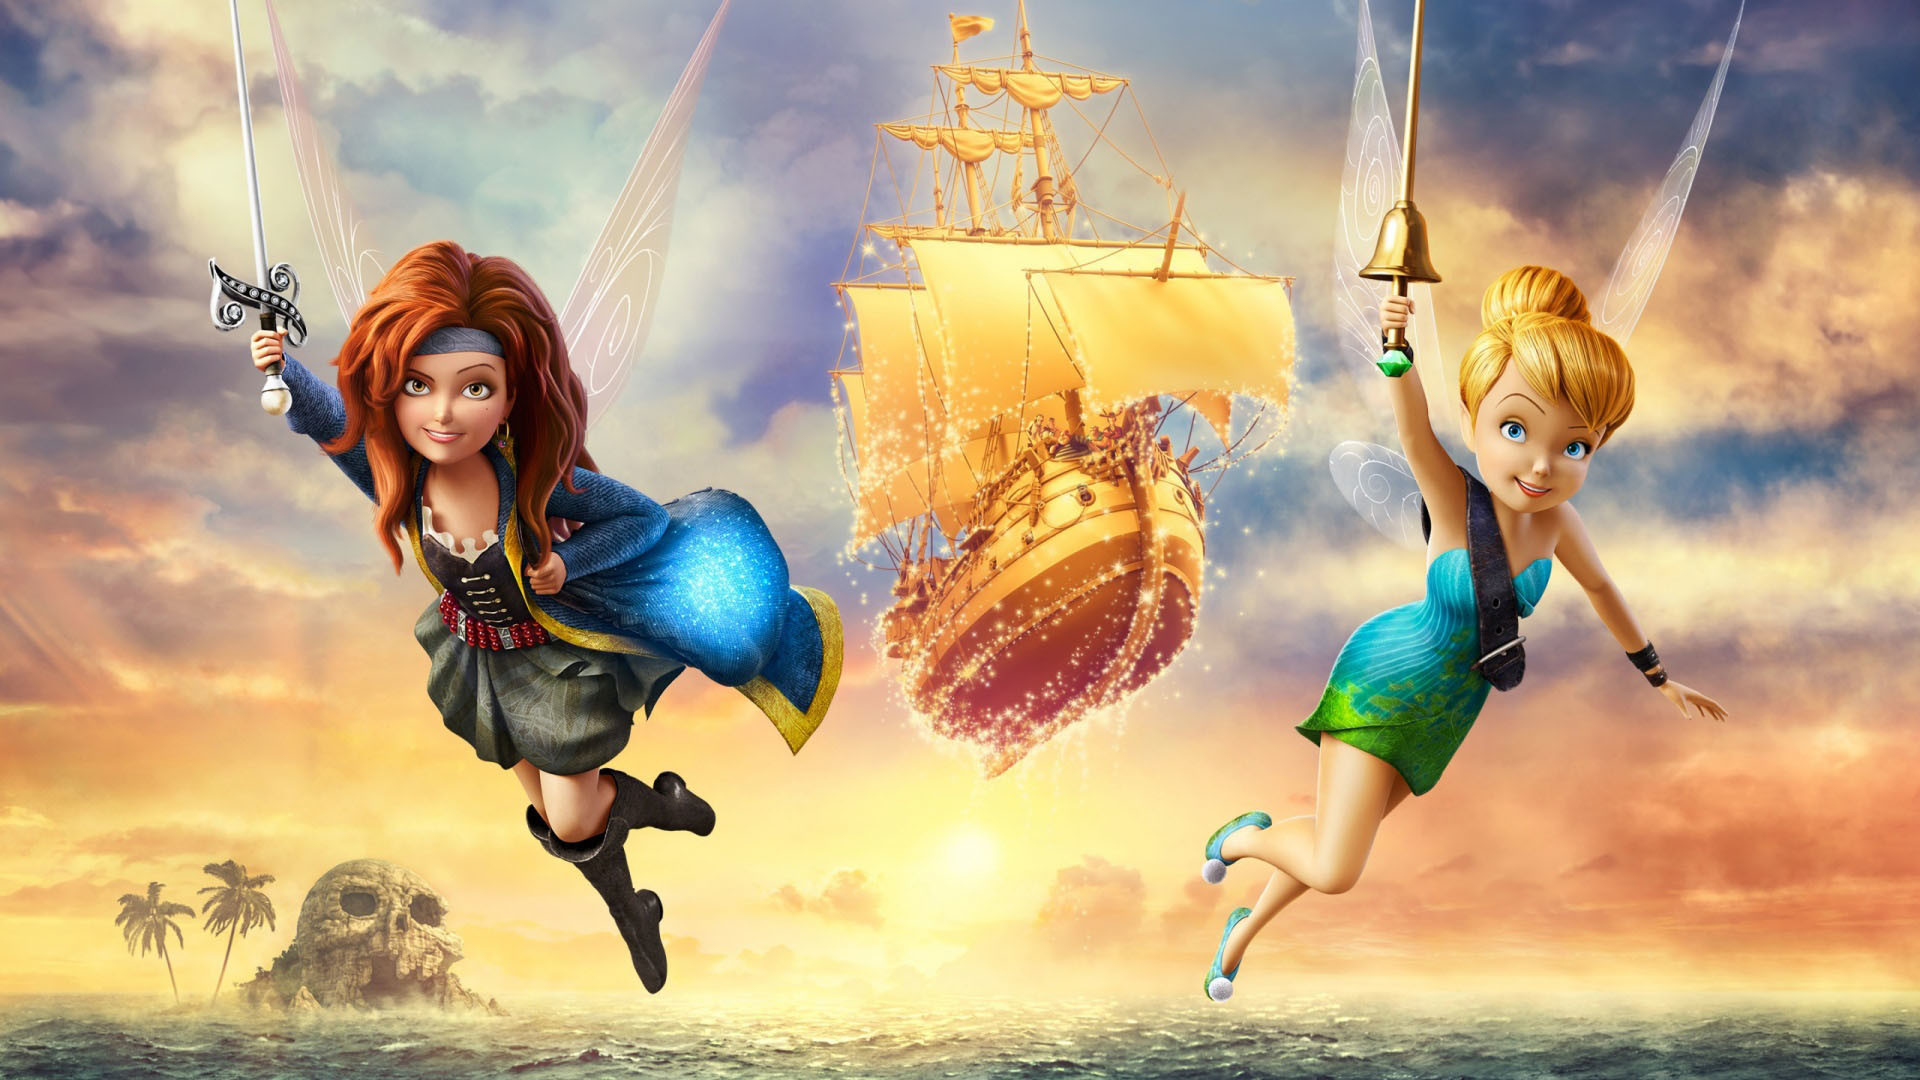 1920x1080 Tinker bell and the pirate fairy